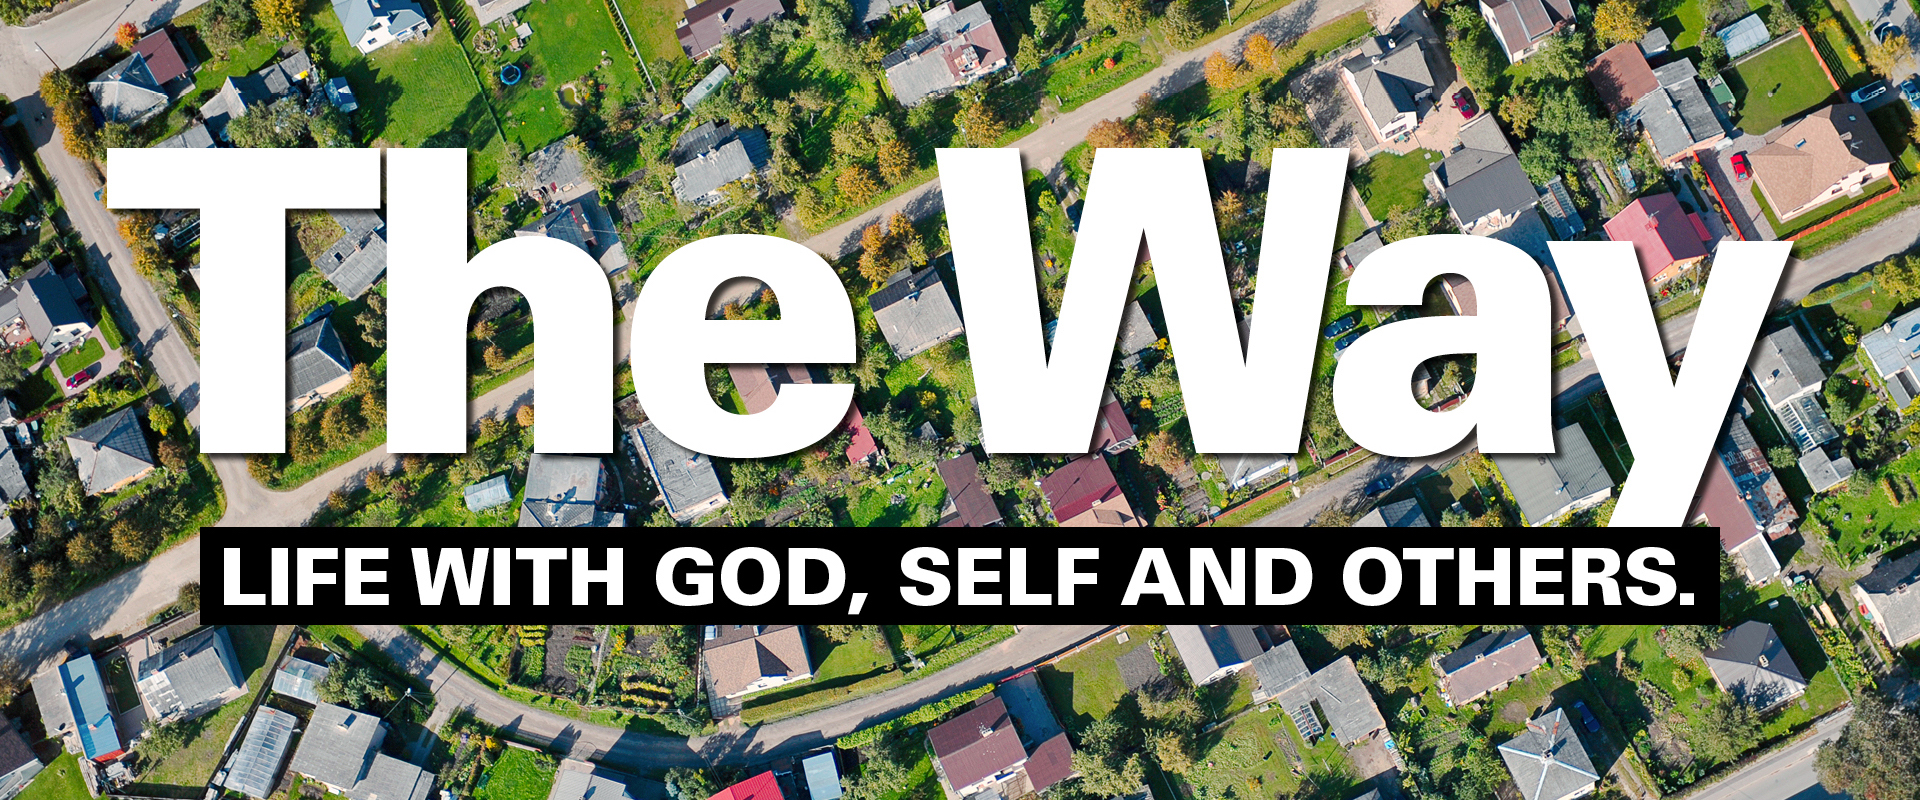 "The Way - Life With God, Self and Others"
August 5 - September 2
